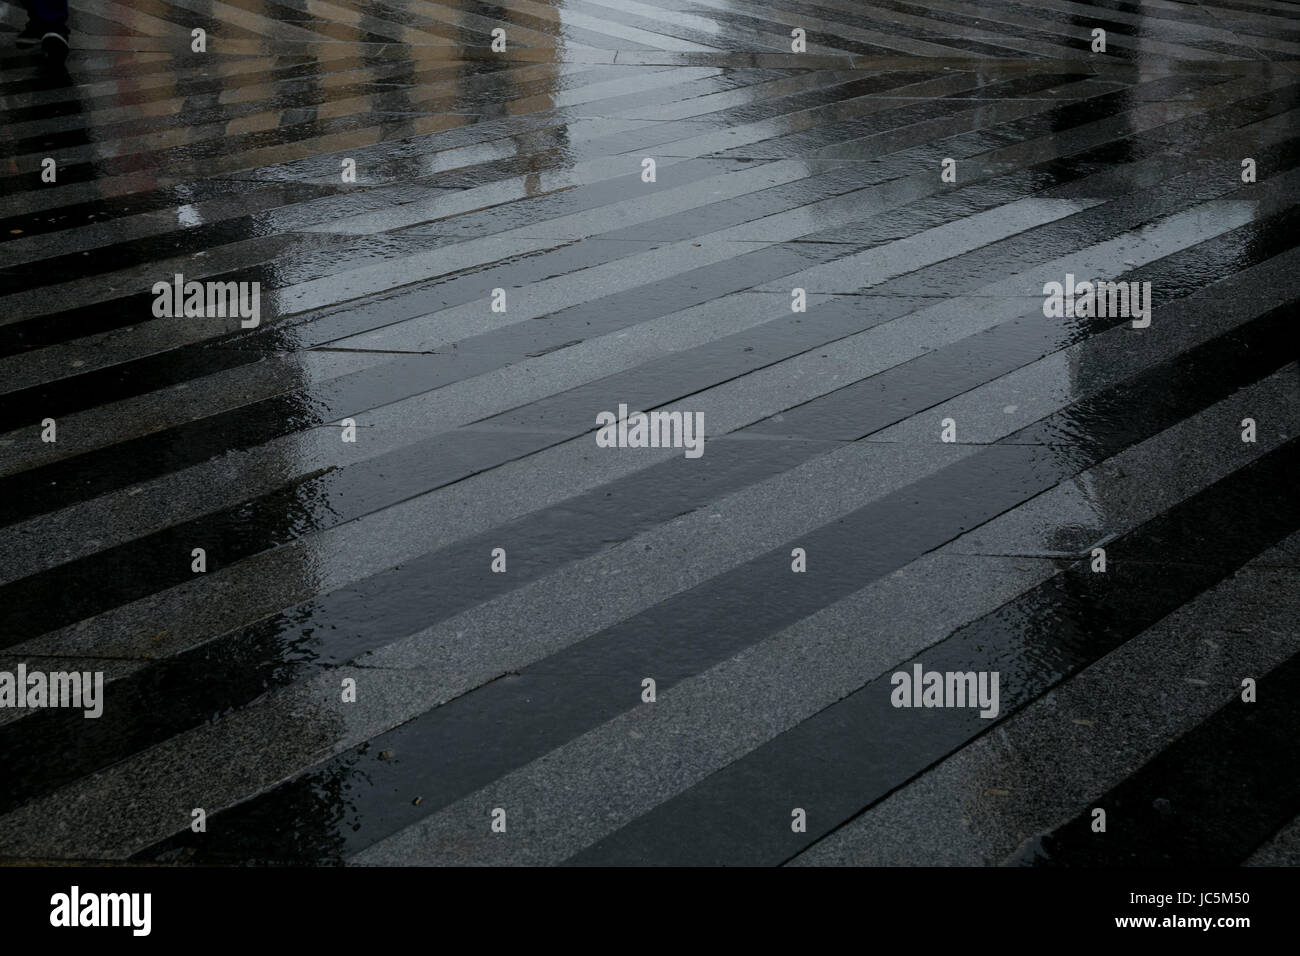 Shadows of people reflected in a rainy floor Stock Photo